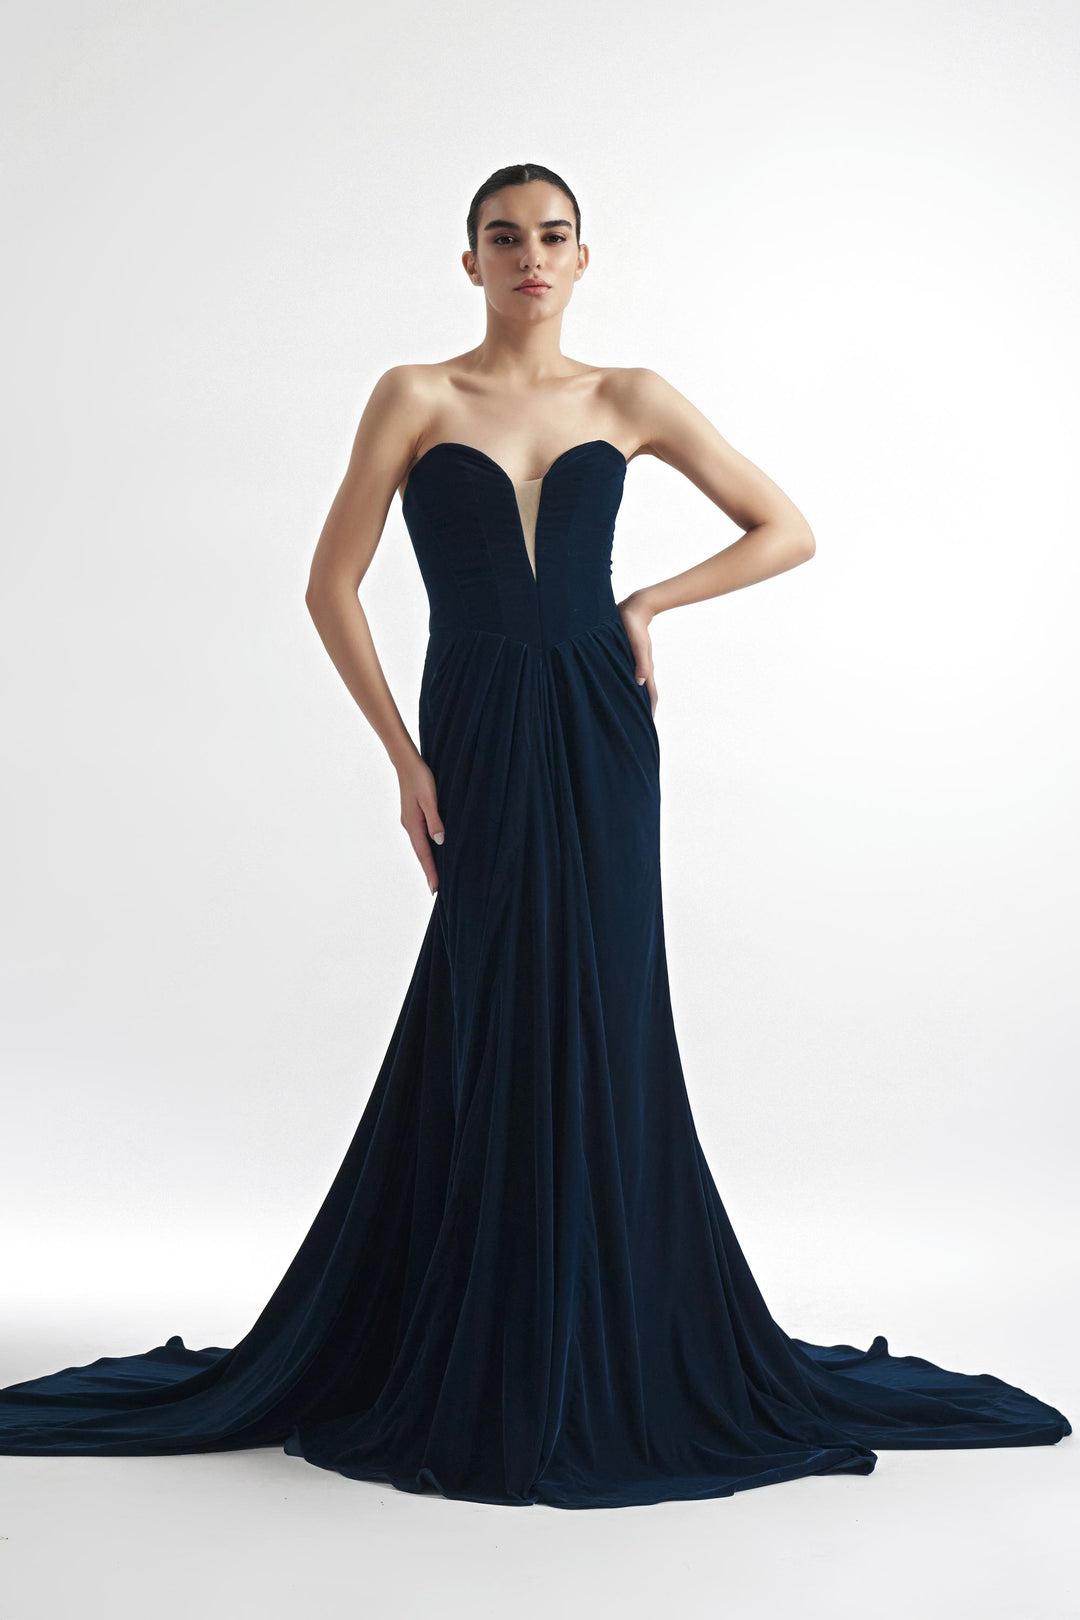 Plunging V- neck strapless drop waist mermaid gown